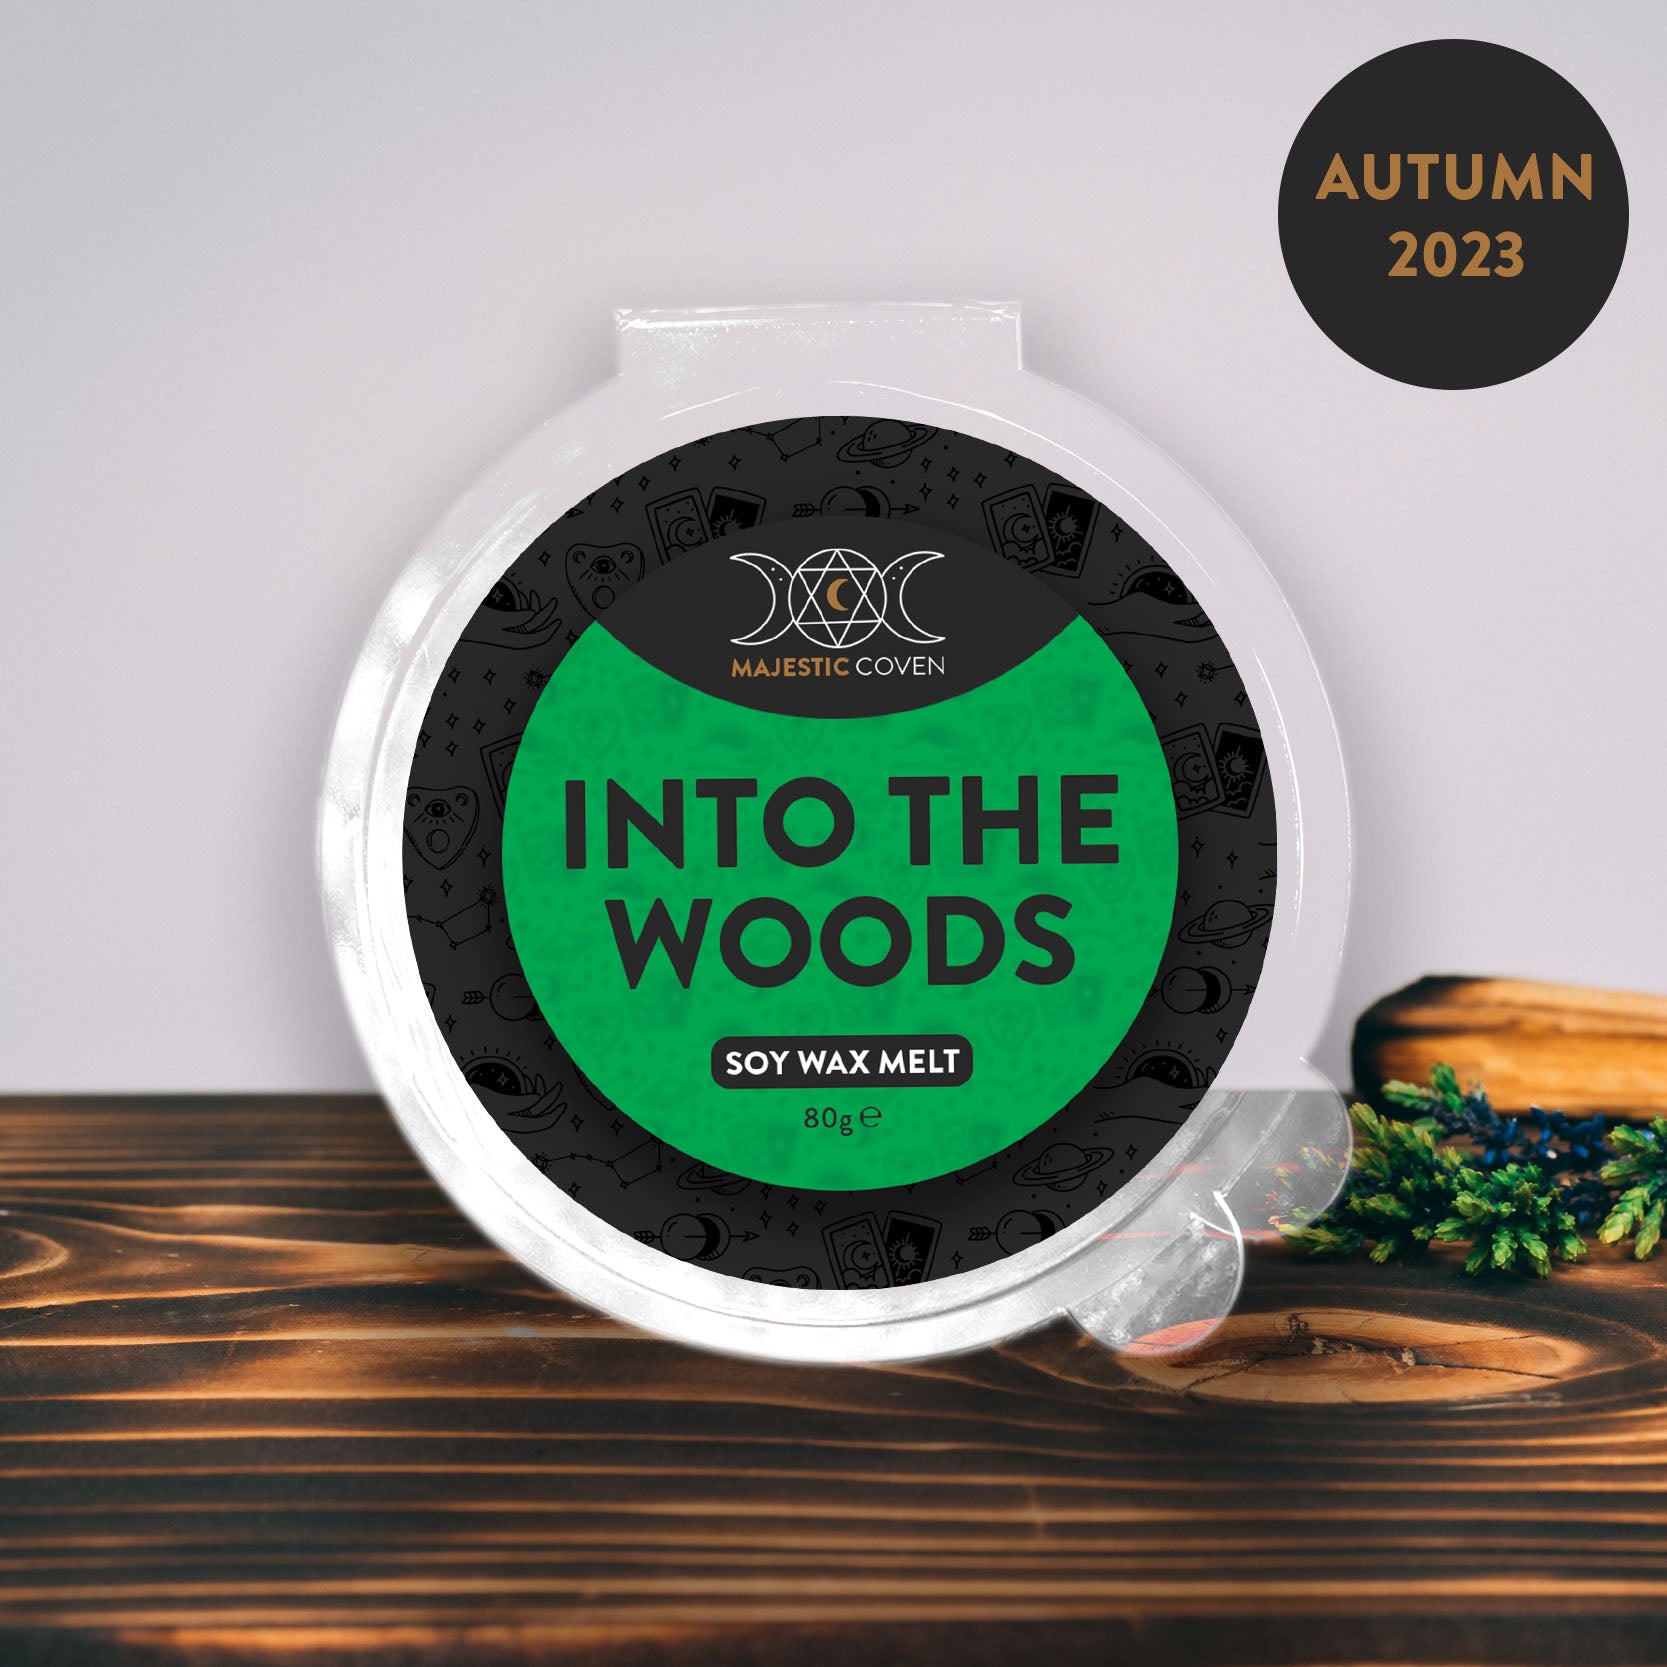 Into the Woods - Soy Wax Melt 80g Segment Pot Majestic Coven